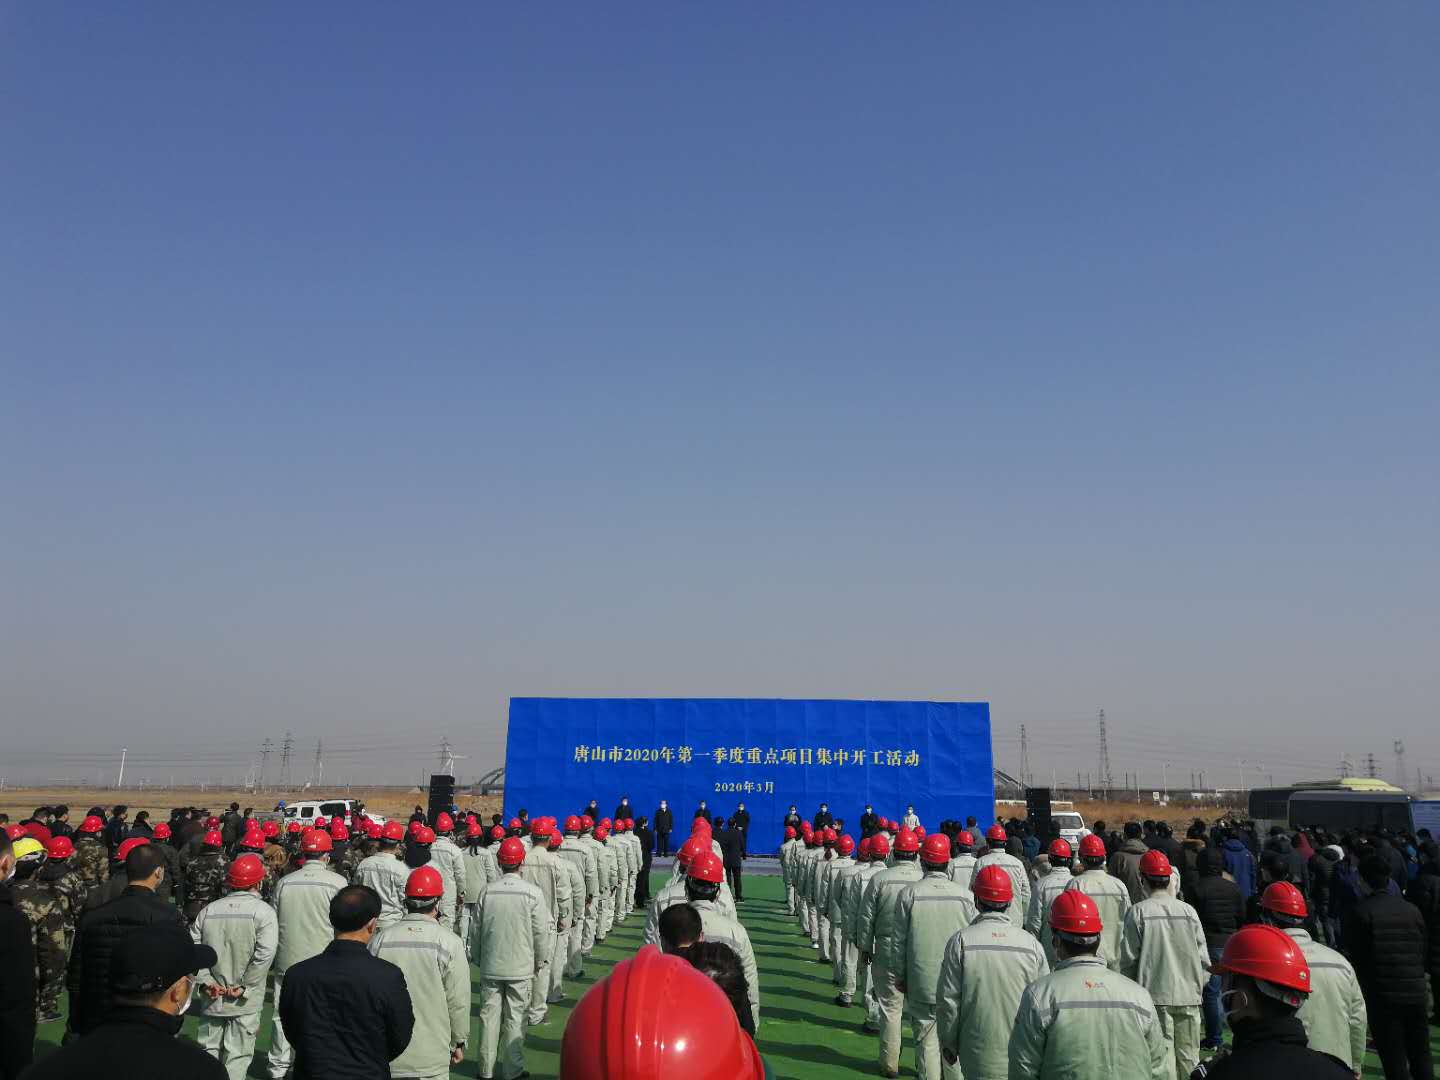 Tangshan 2020 Project Centralized Commencement Ceremony was held at the company's silane coupling agent project site